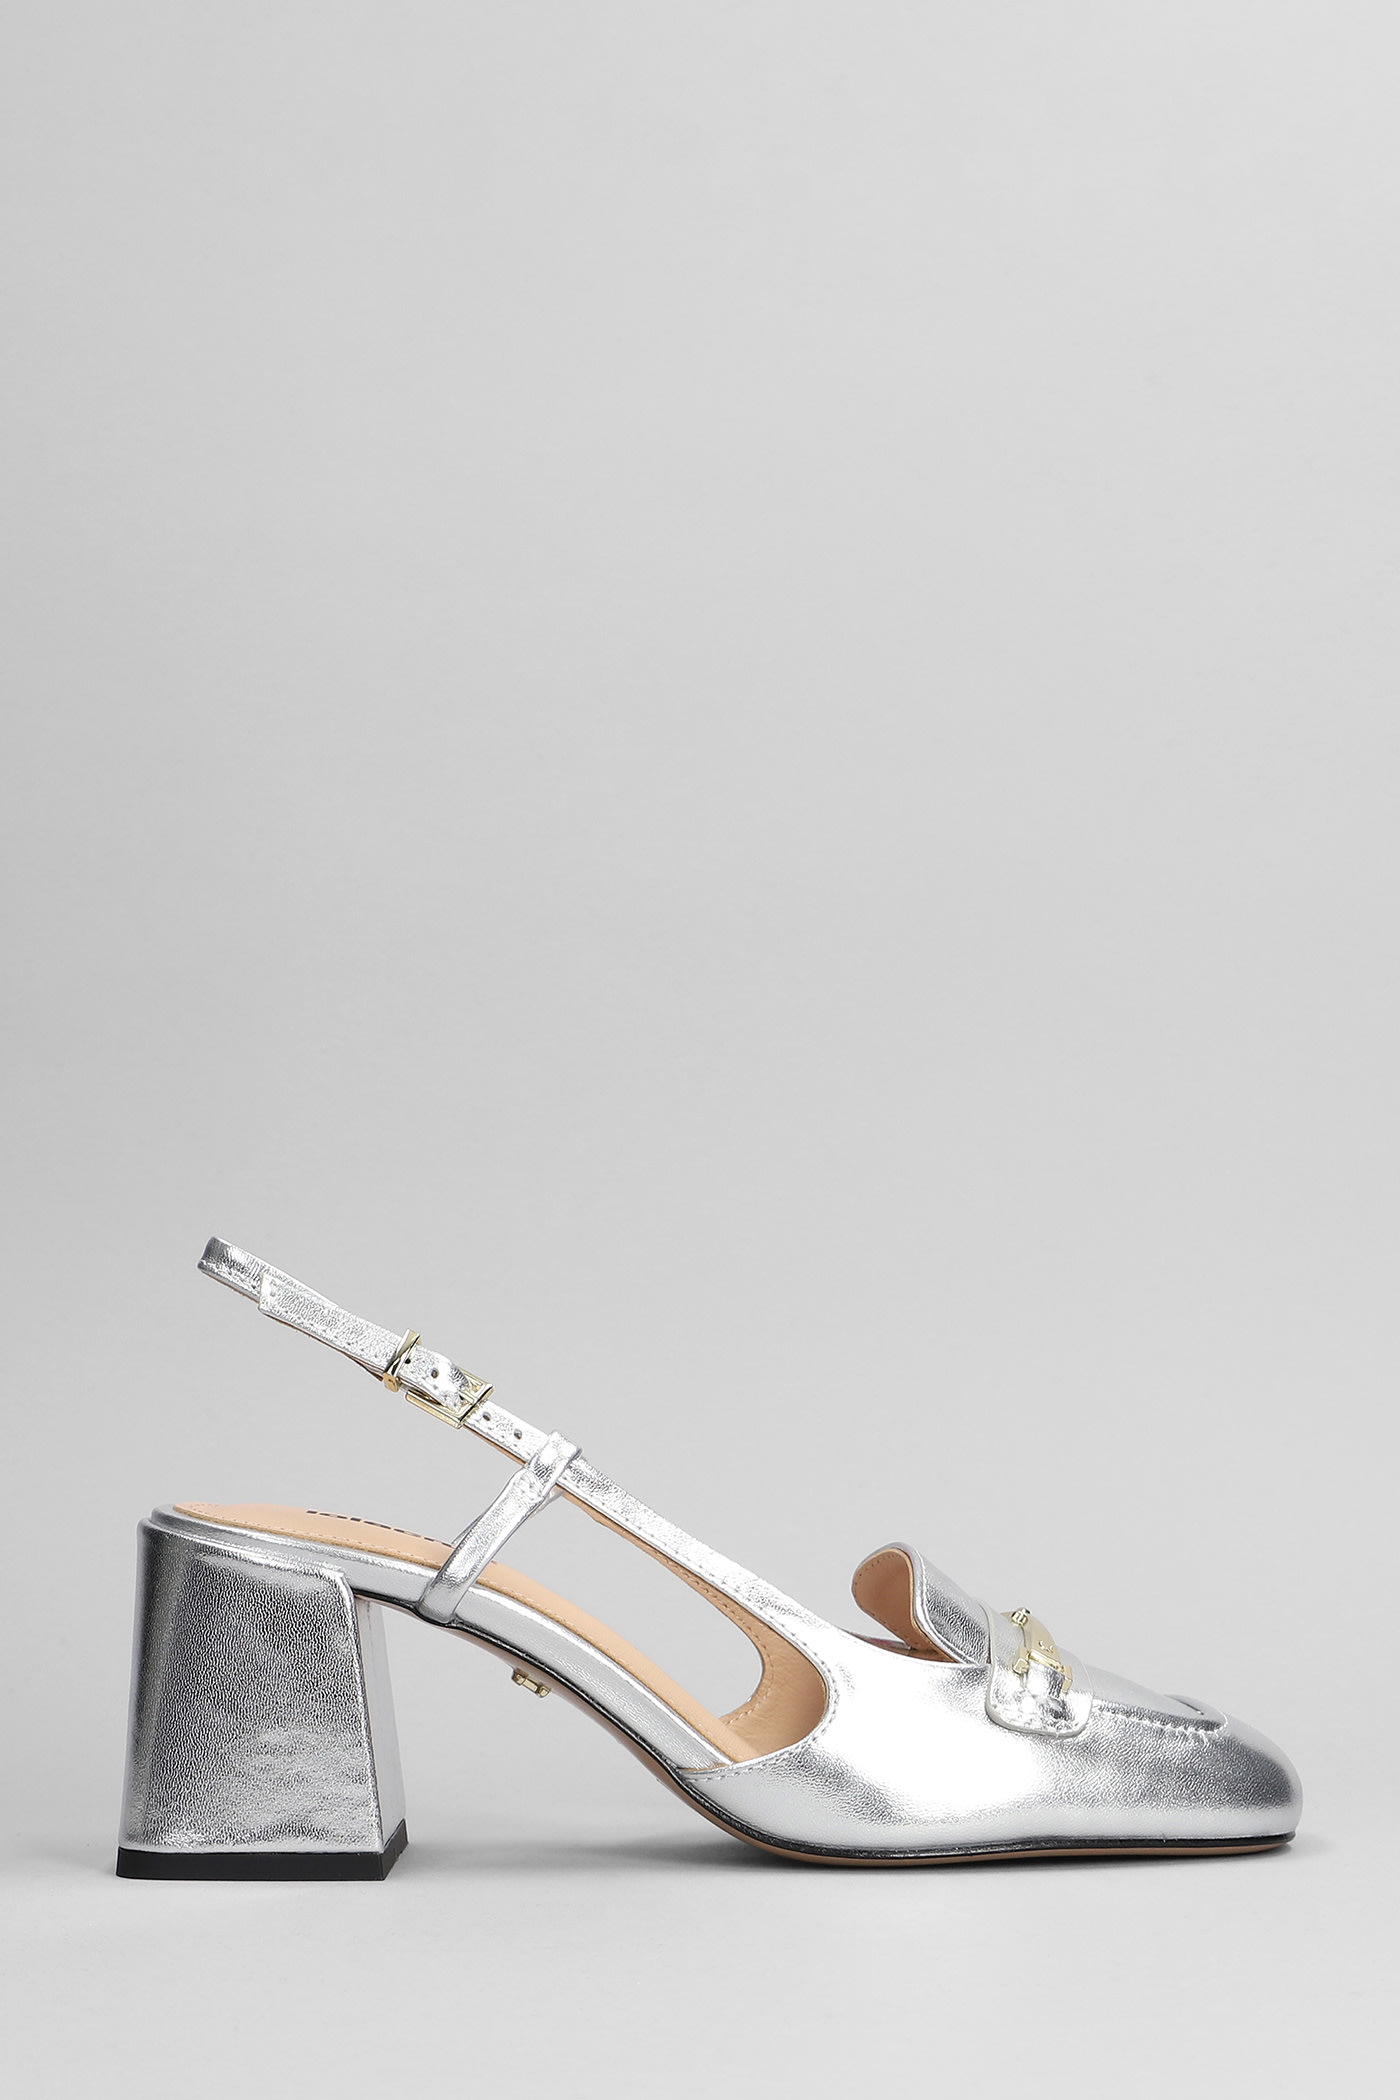 Clover 55 Pumps In Silver Leather